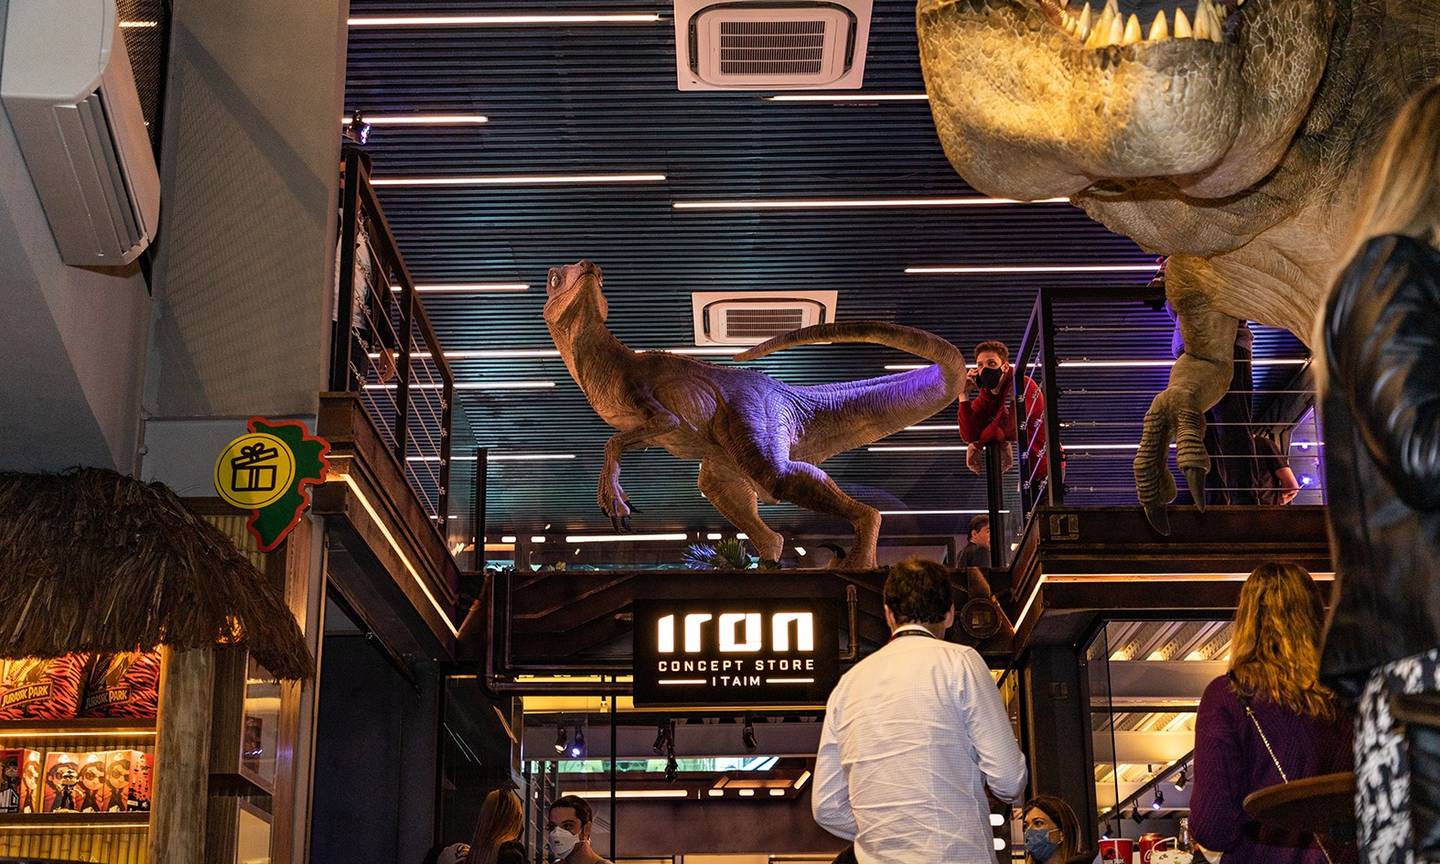 Jurassic Park opens four-story dining complex for geek culture fans, backed by U.S. studiodfd